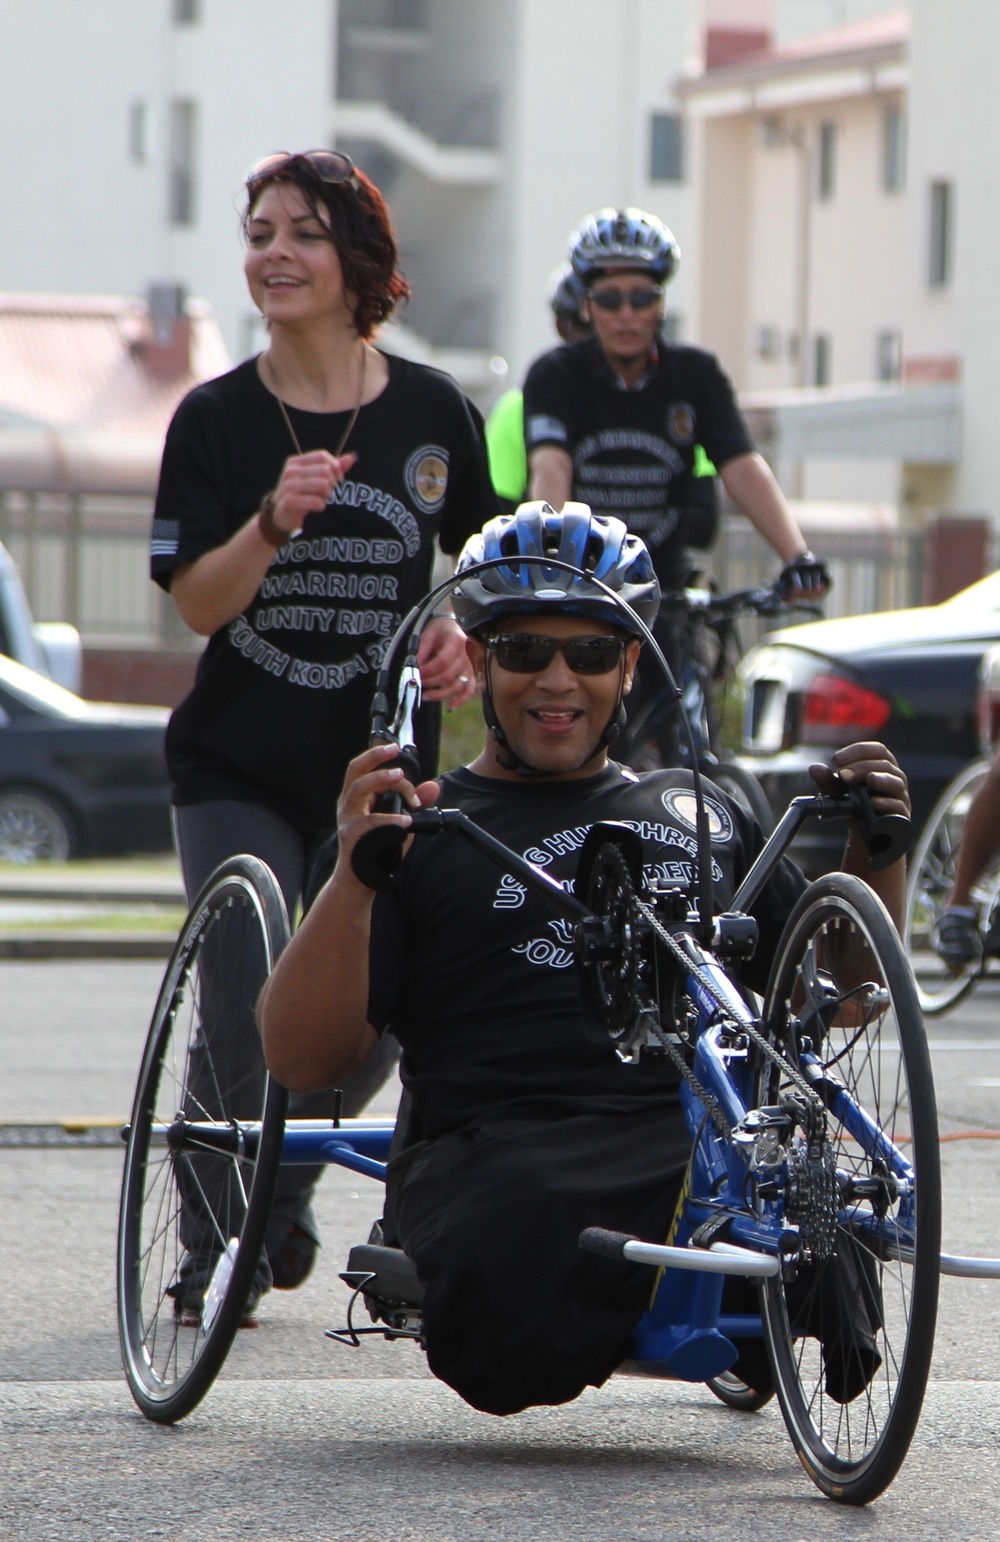 Wounded Warrior spreads message of resiliency